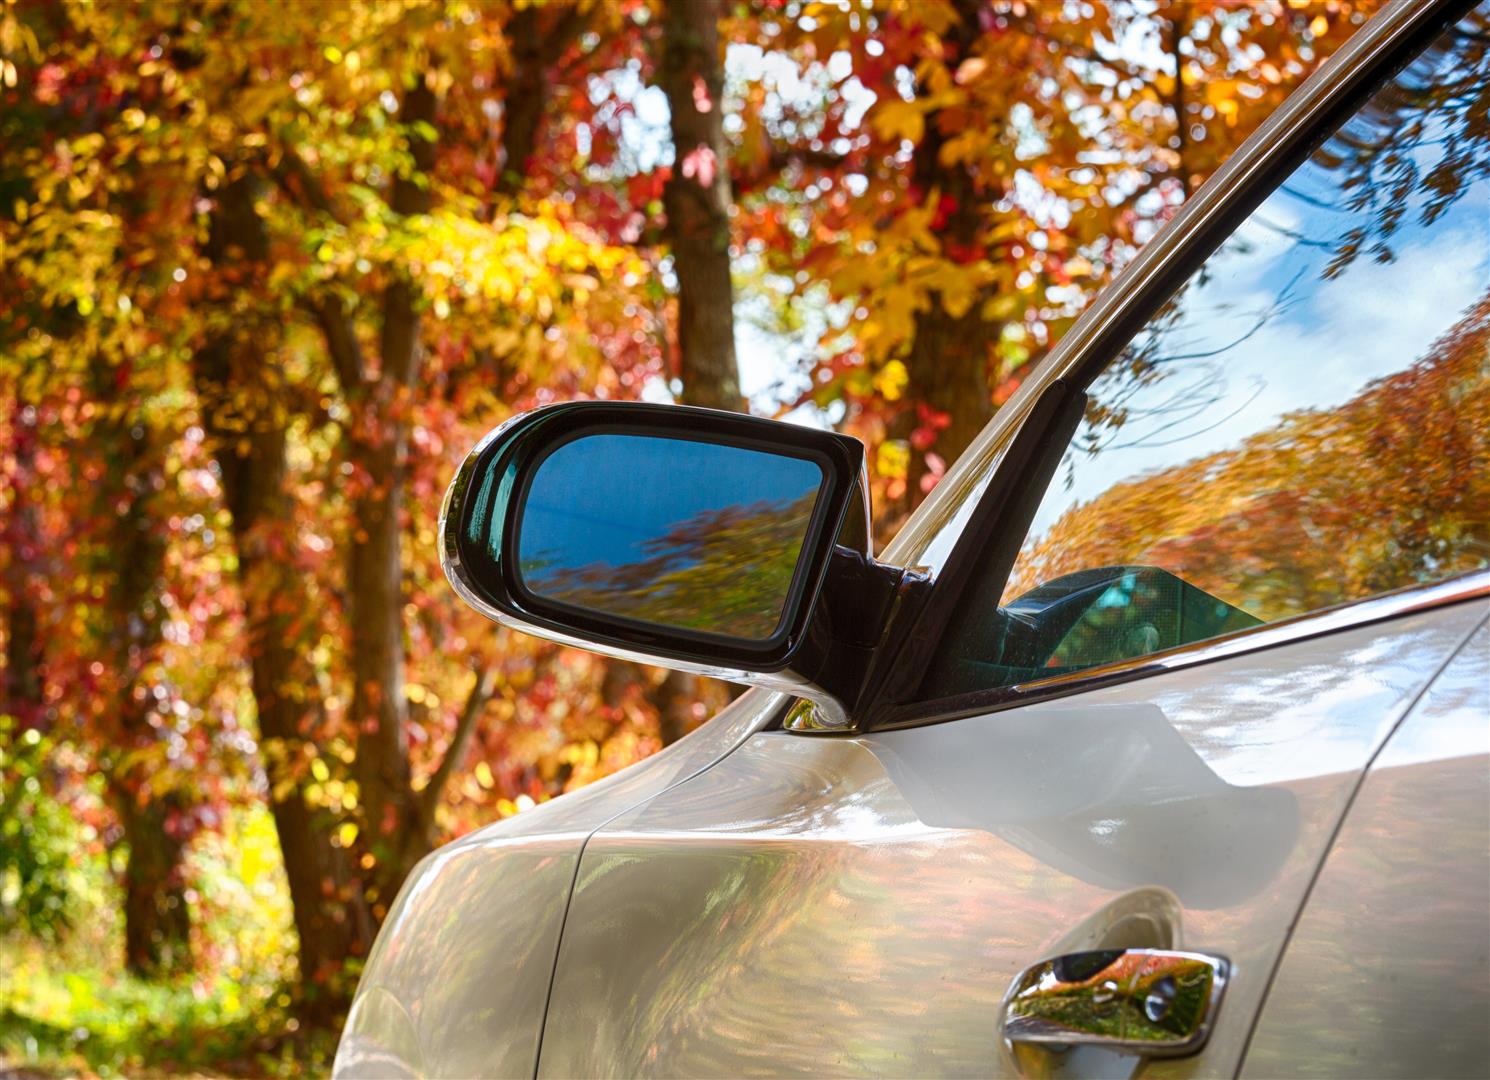 Should You Change Your Oil Before the Autumn Season